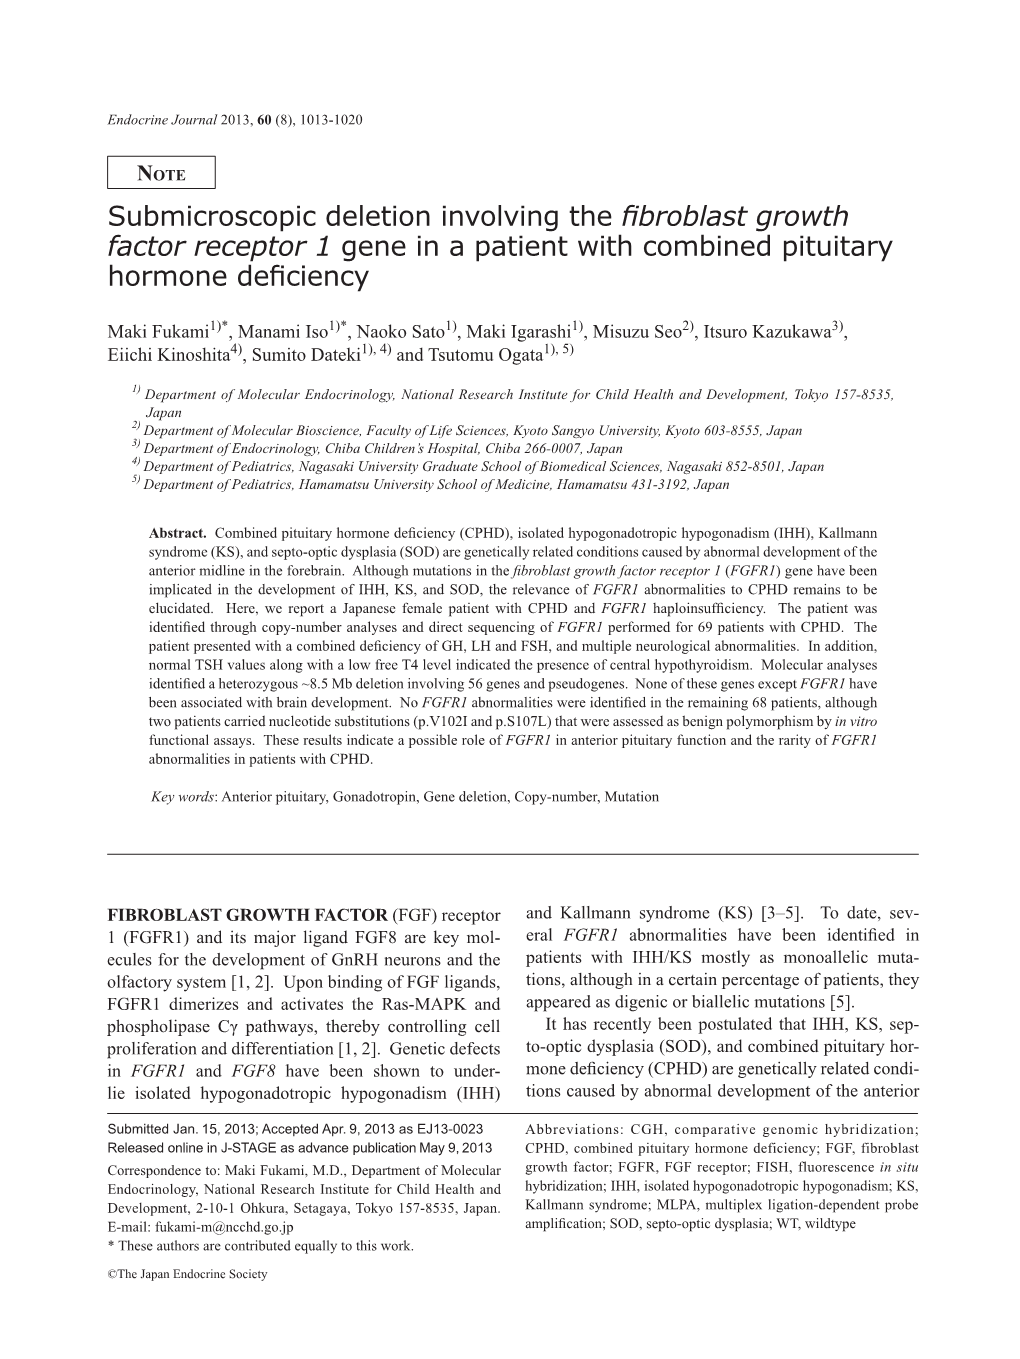 Submicroscopic Deletion Involving the Fibroblast Growth Factor Receptor 1 Gene in a Patient with Combined Pituitary Hormone Deficiency